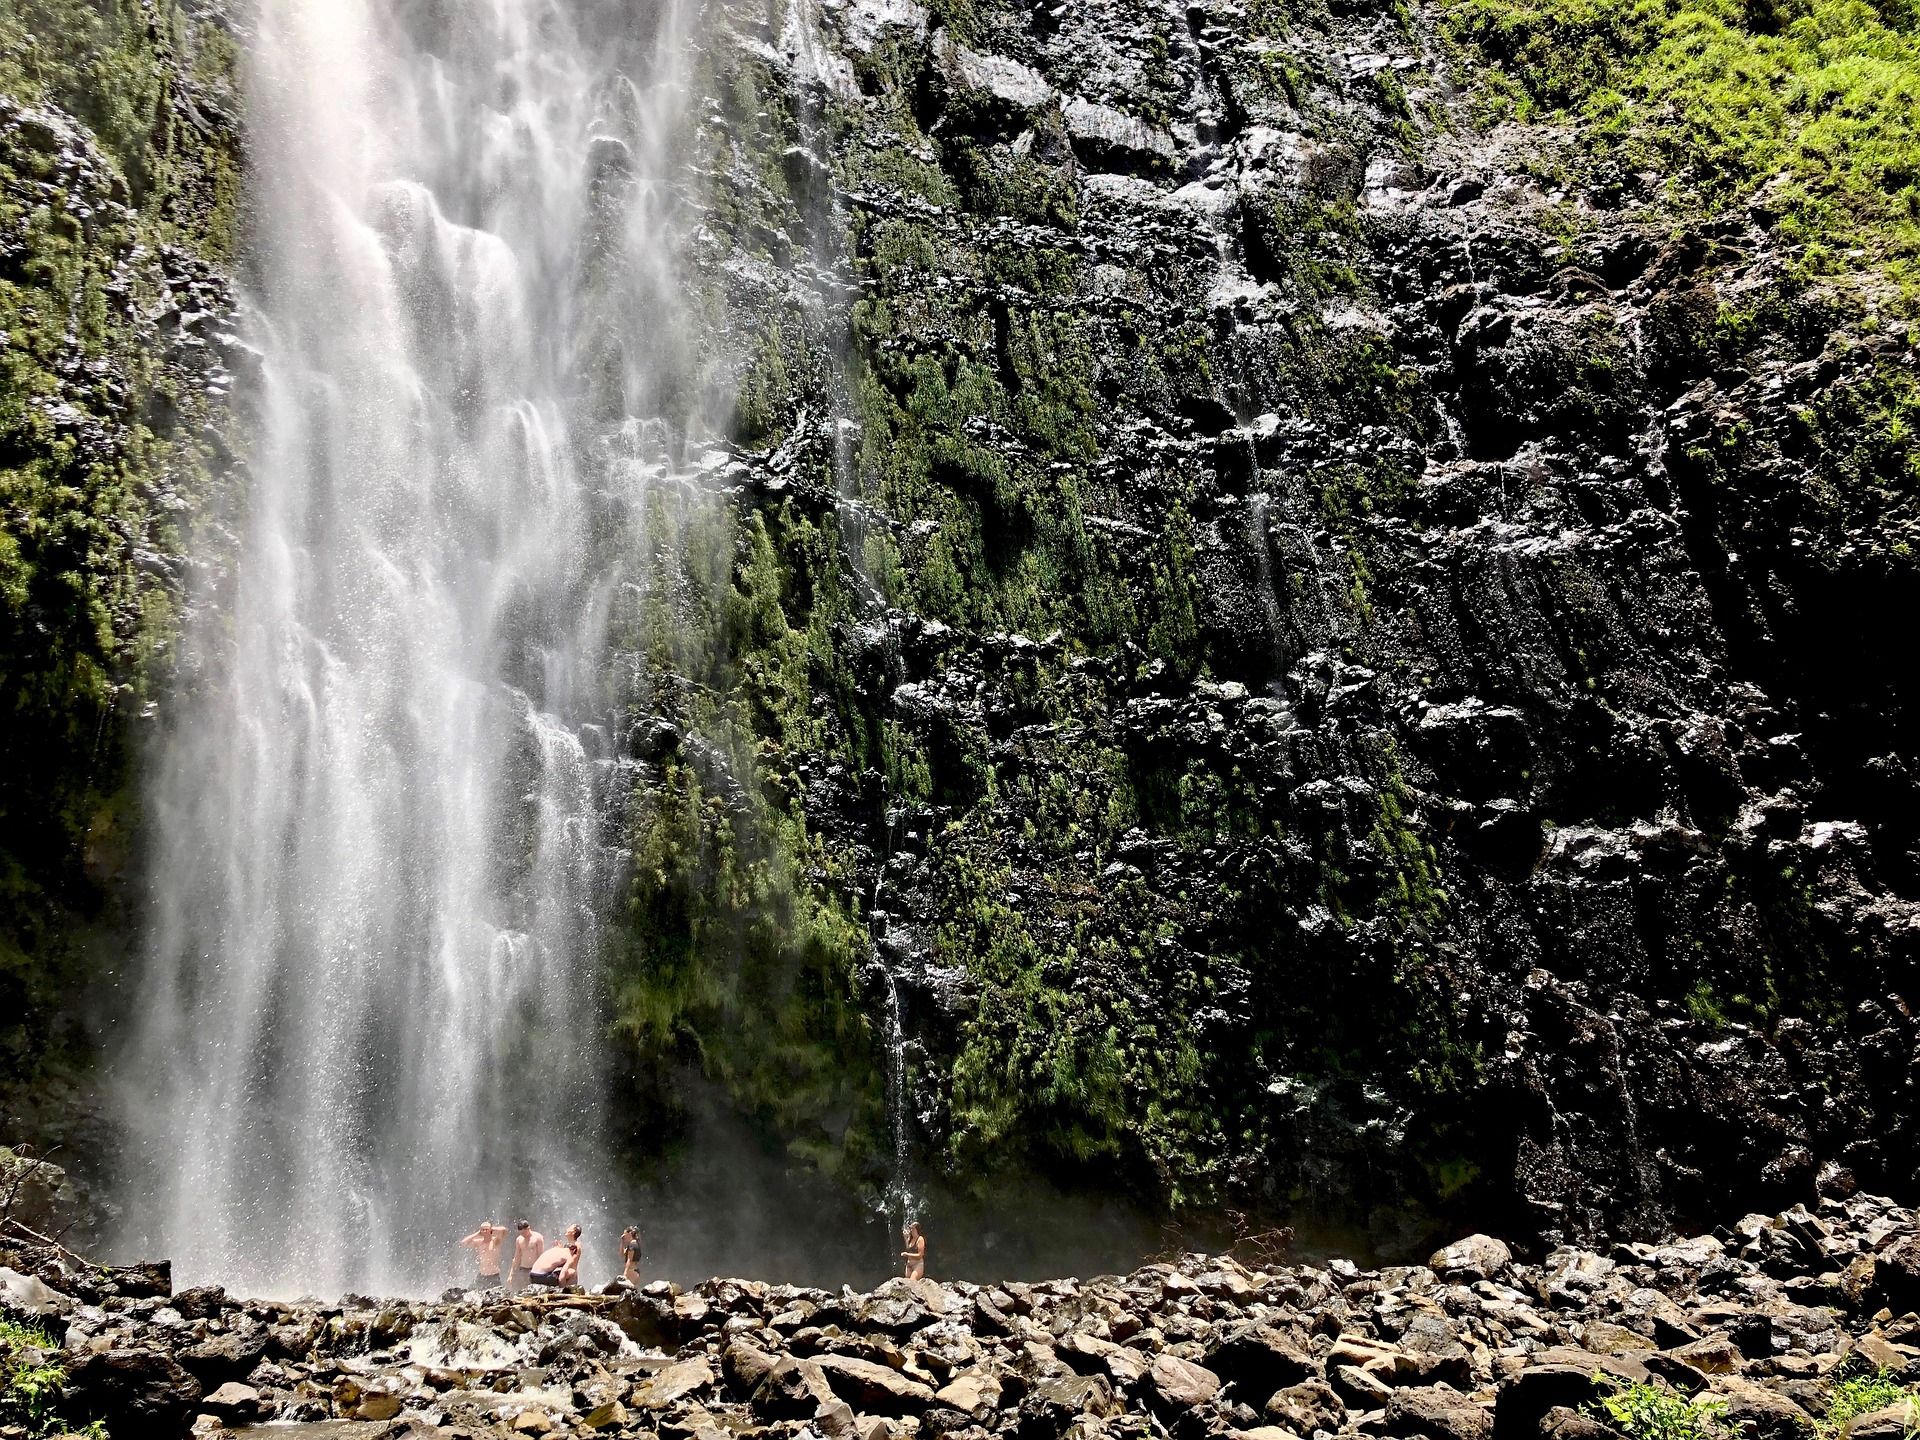 Road to Hana waterfalls with accessible trails and ample parking are popular stops on the Hana Highway in Maui, Hawaii